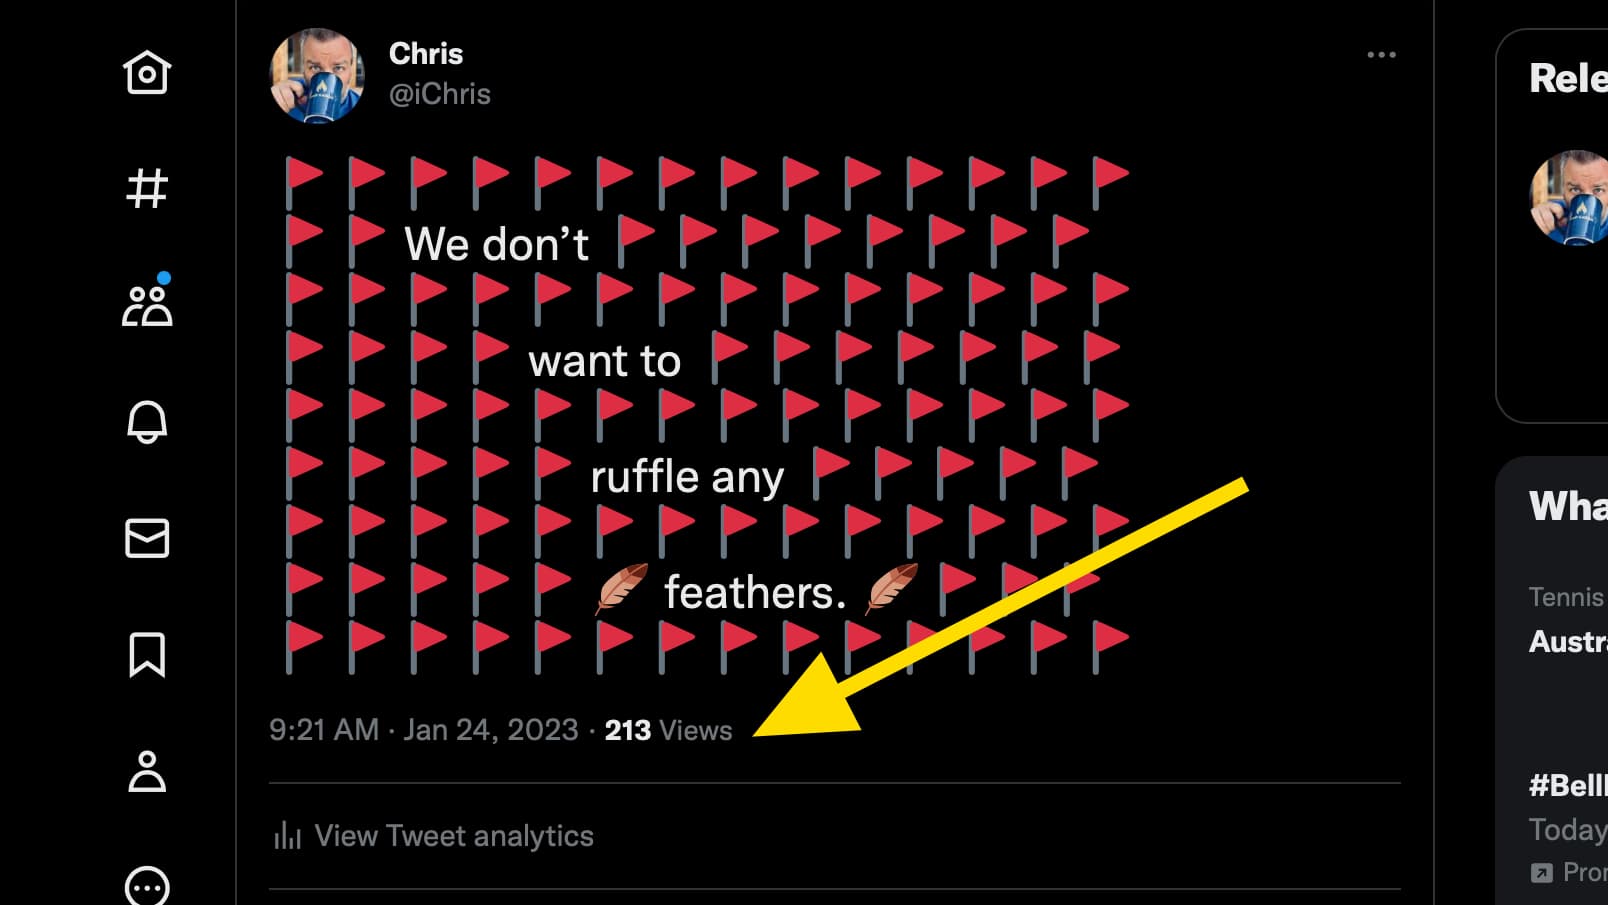 Screenshot of one of my tweets showing 213 views in the analytics.